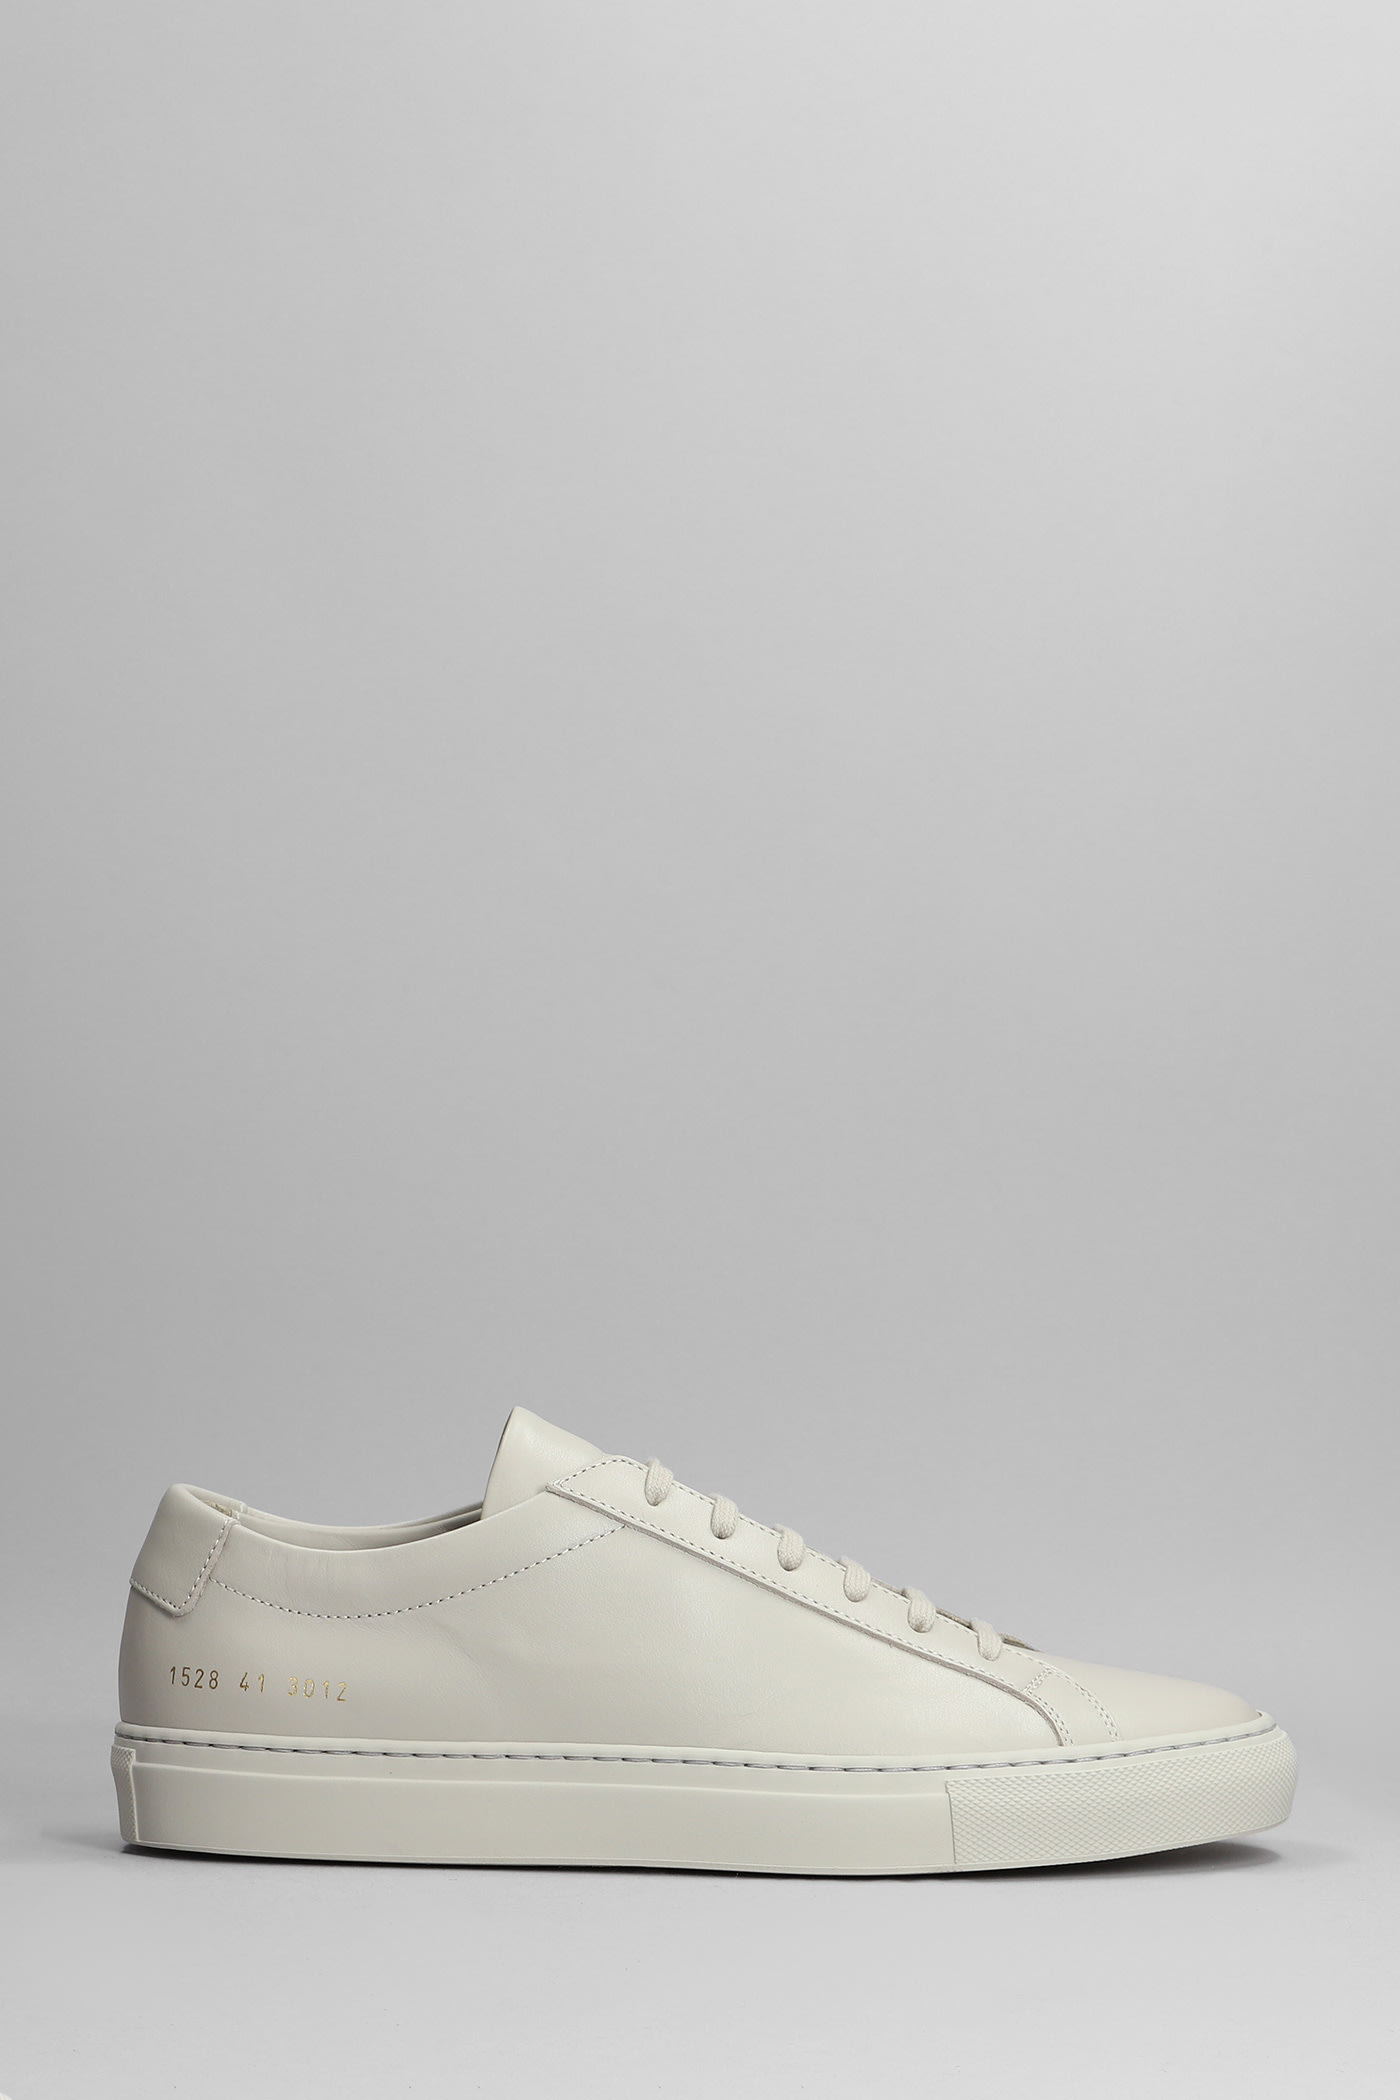 Common Projects Original Achilles Sneakers In Beige Leather